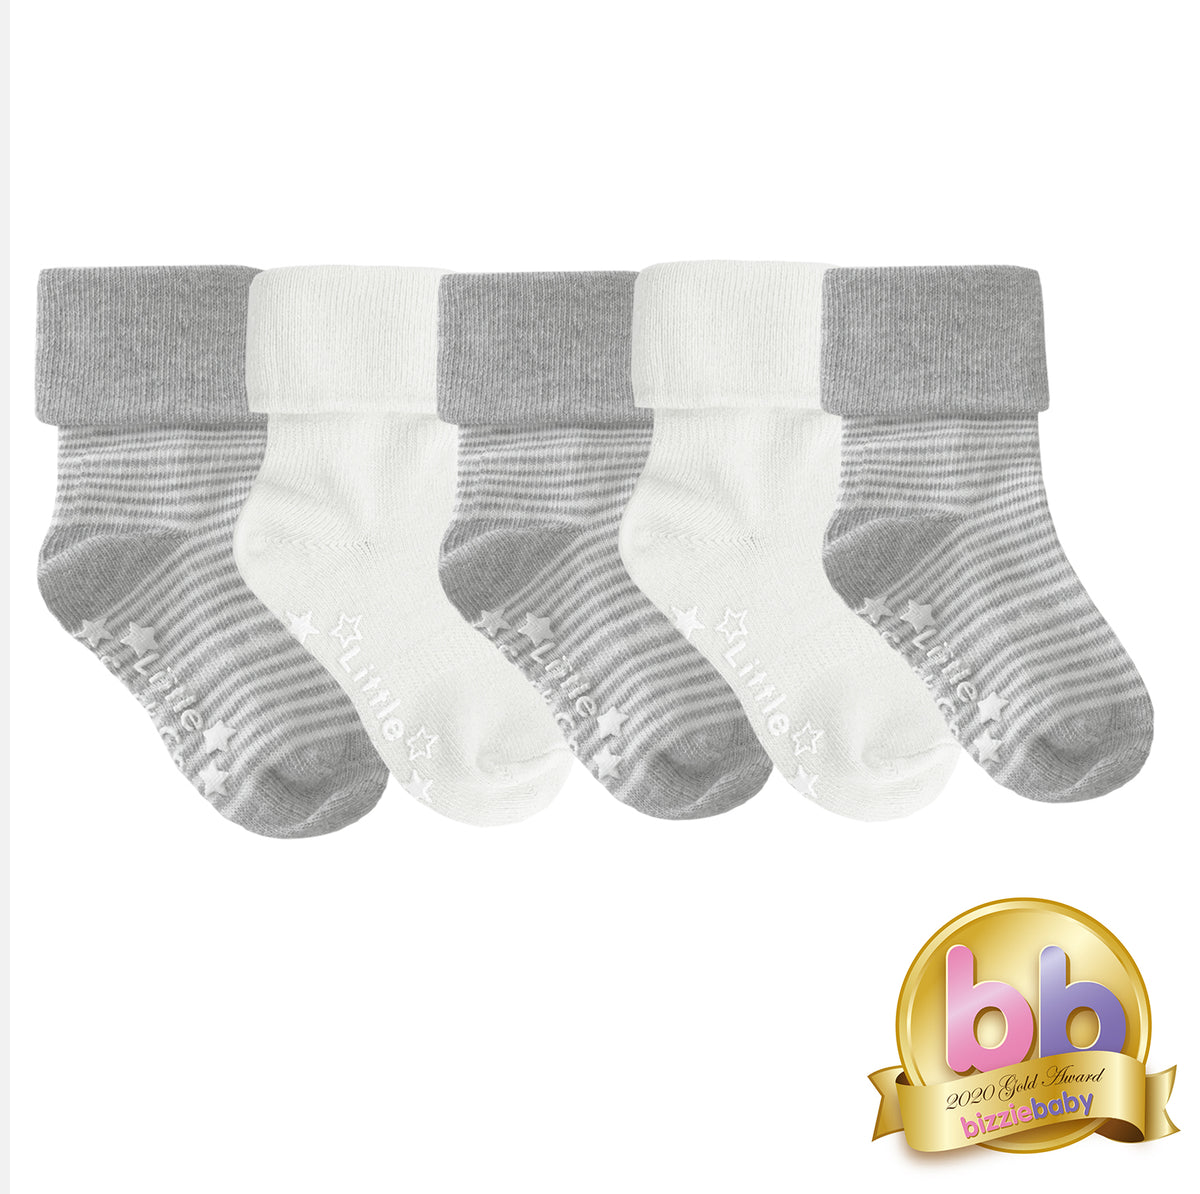 Non-Slip Stay on Baby and Toddler Socks - Unisex 5 Pack Grey and Marshmallow White